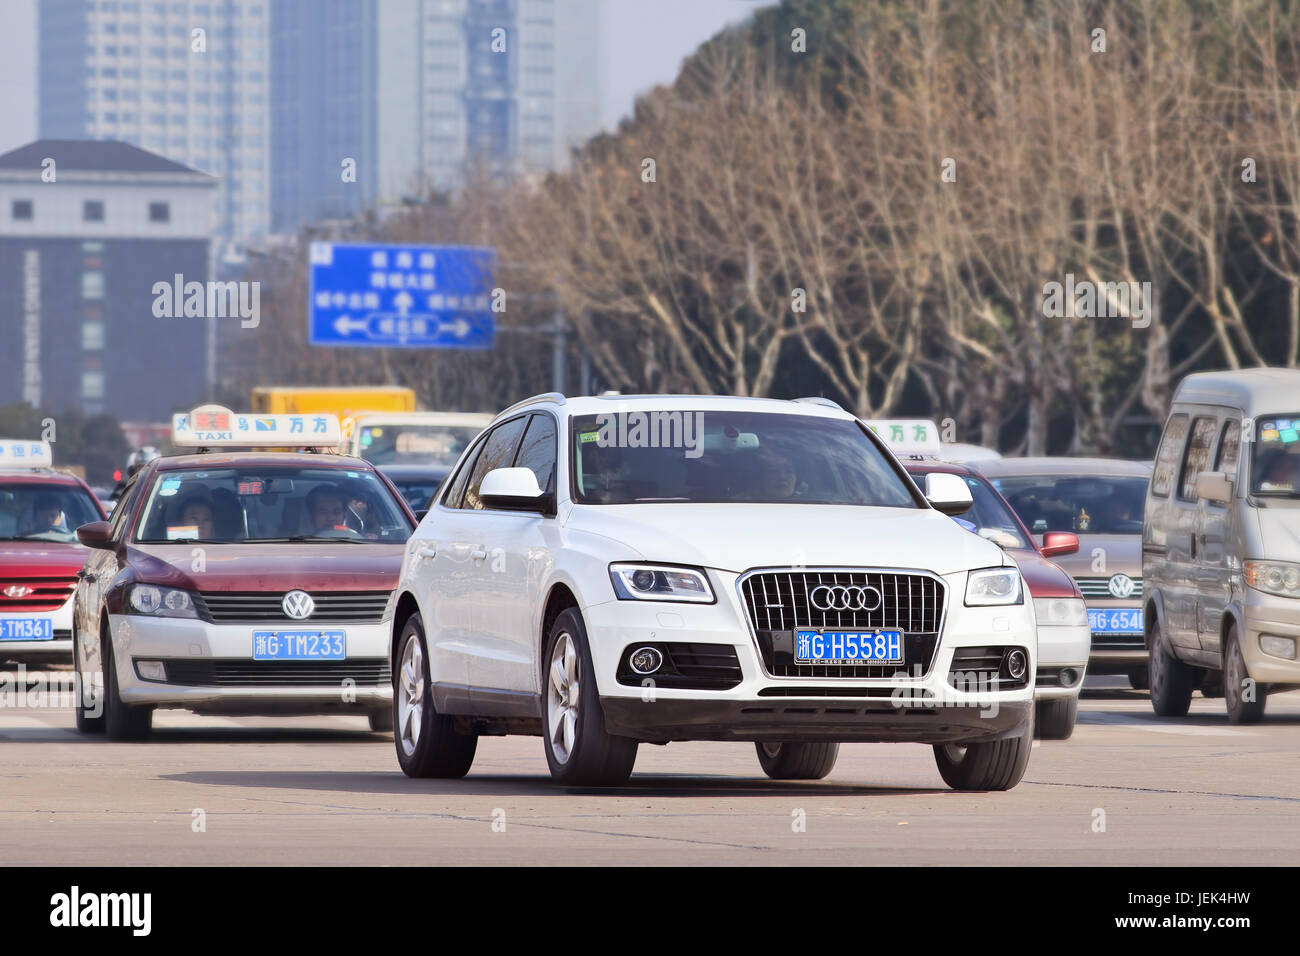 Audi Q5 SUV. China alone forms almost one-third of Audi’s sales volume, The German brand holds the dominant position in China's premium car market. Stock Photo